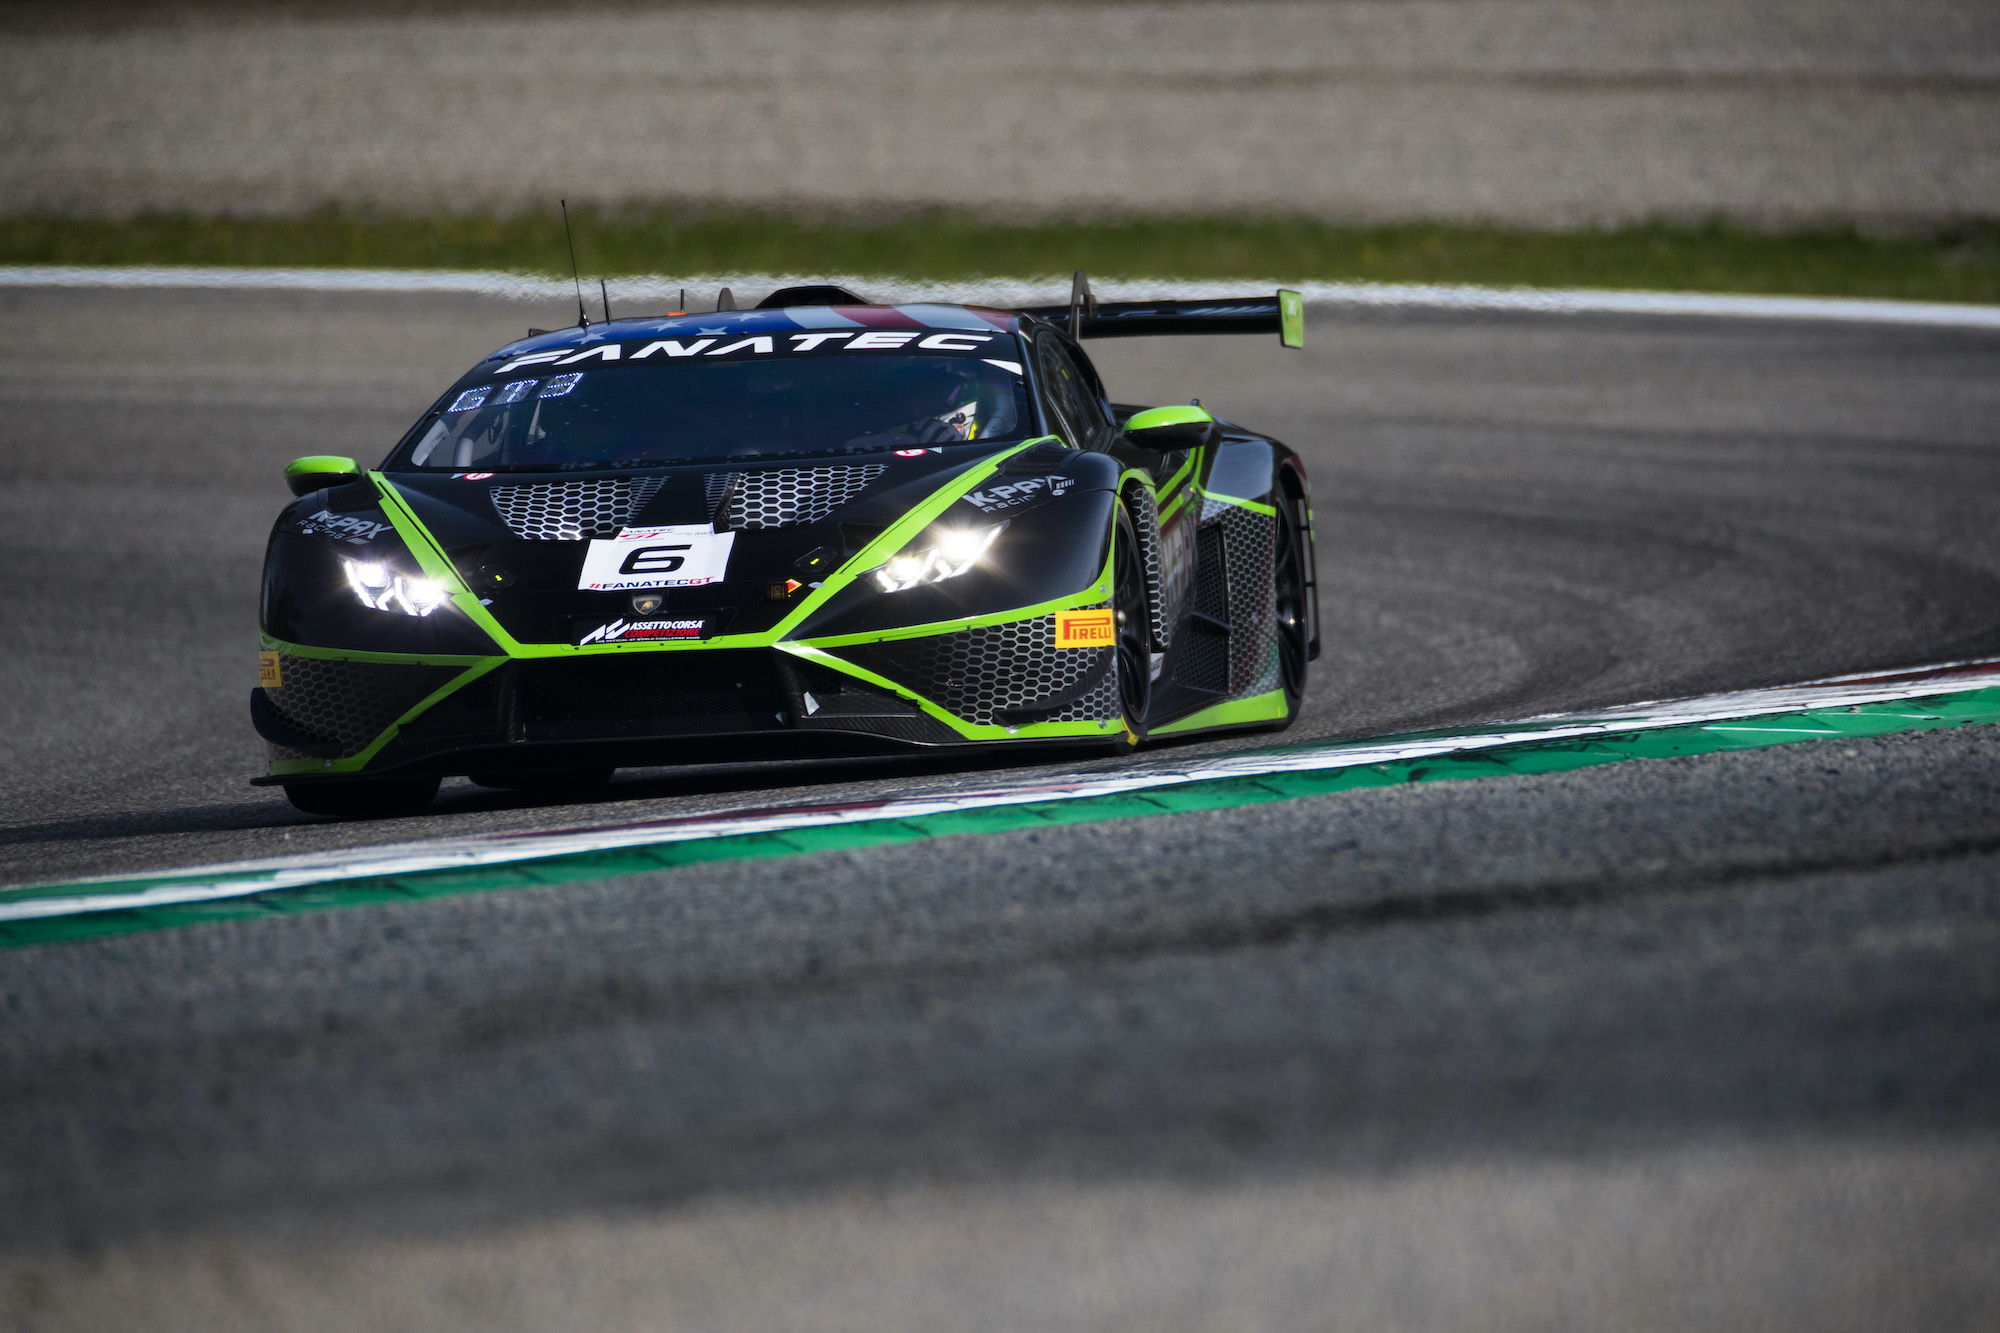 Driving into the dark: K-PAX Racing set for 1000km Paul Ricard